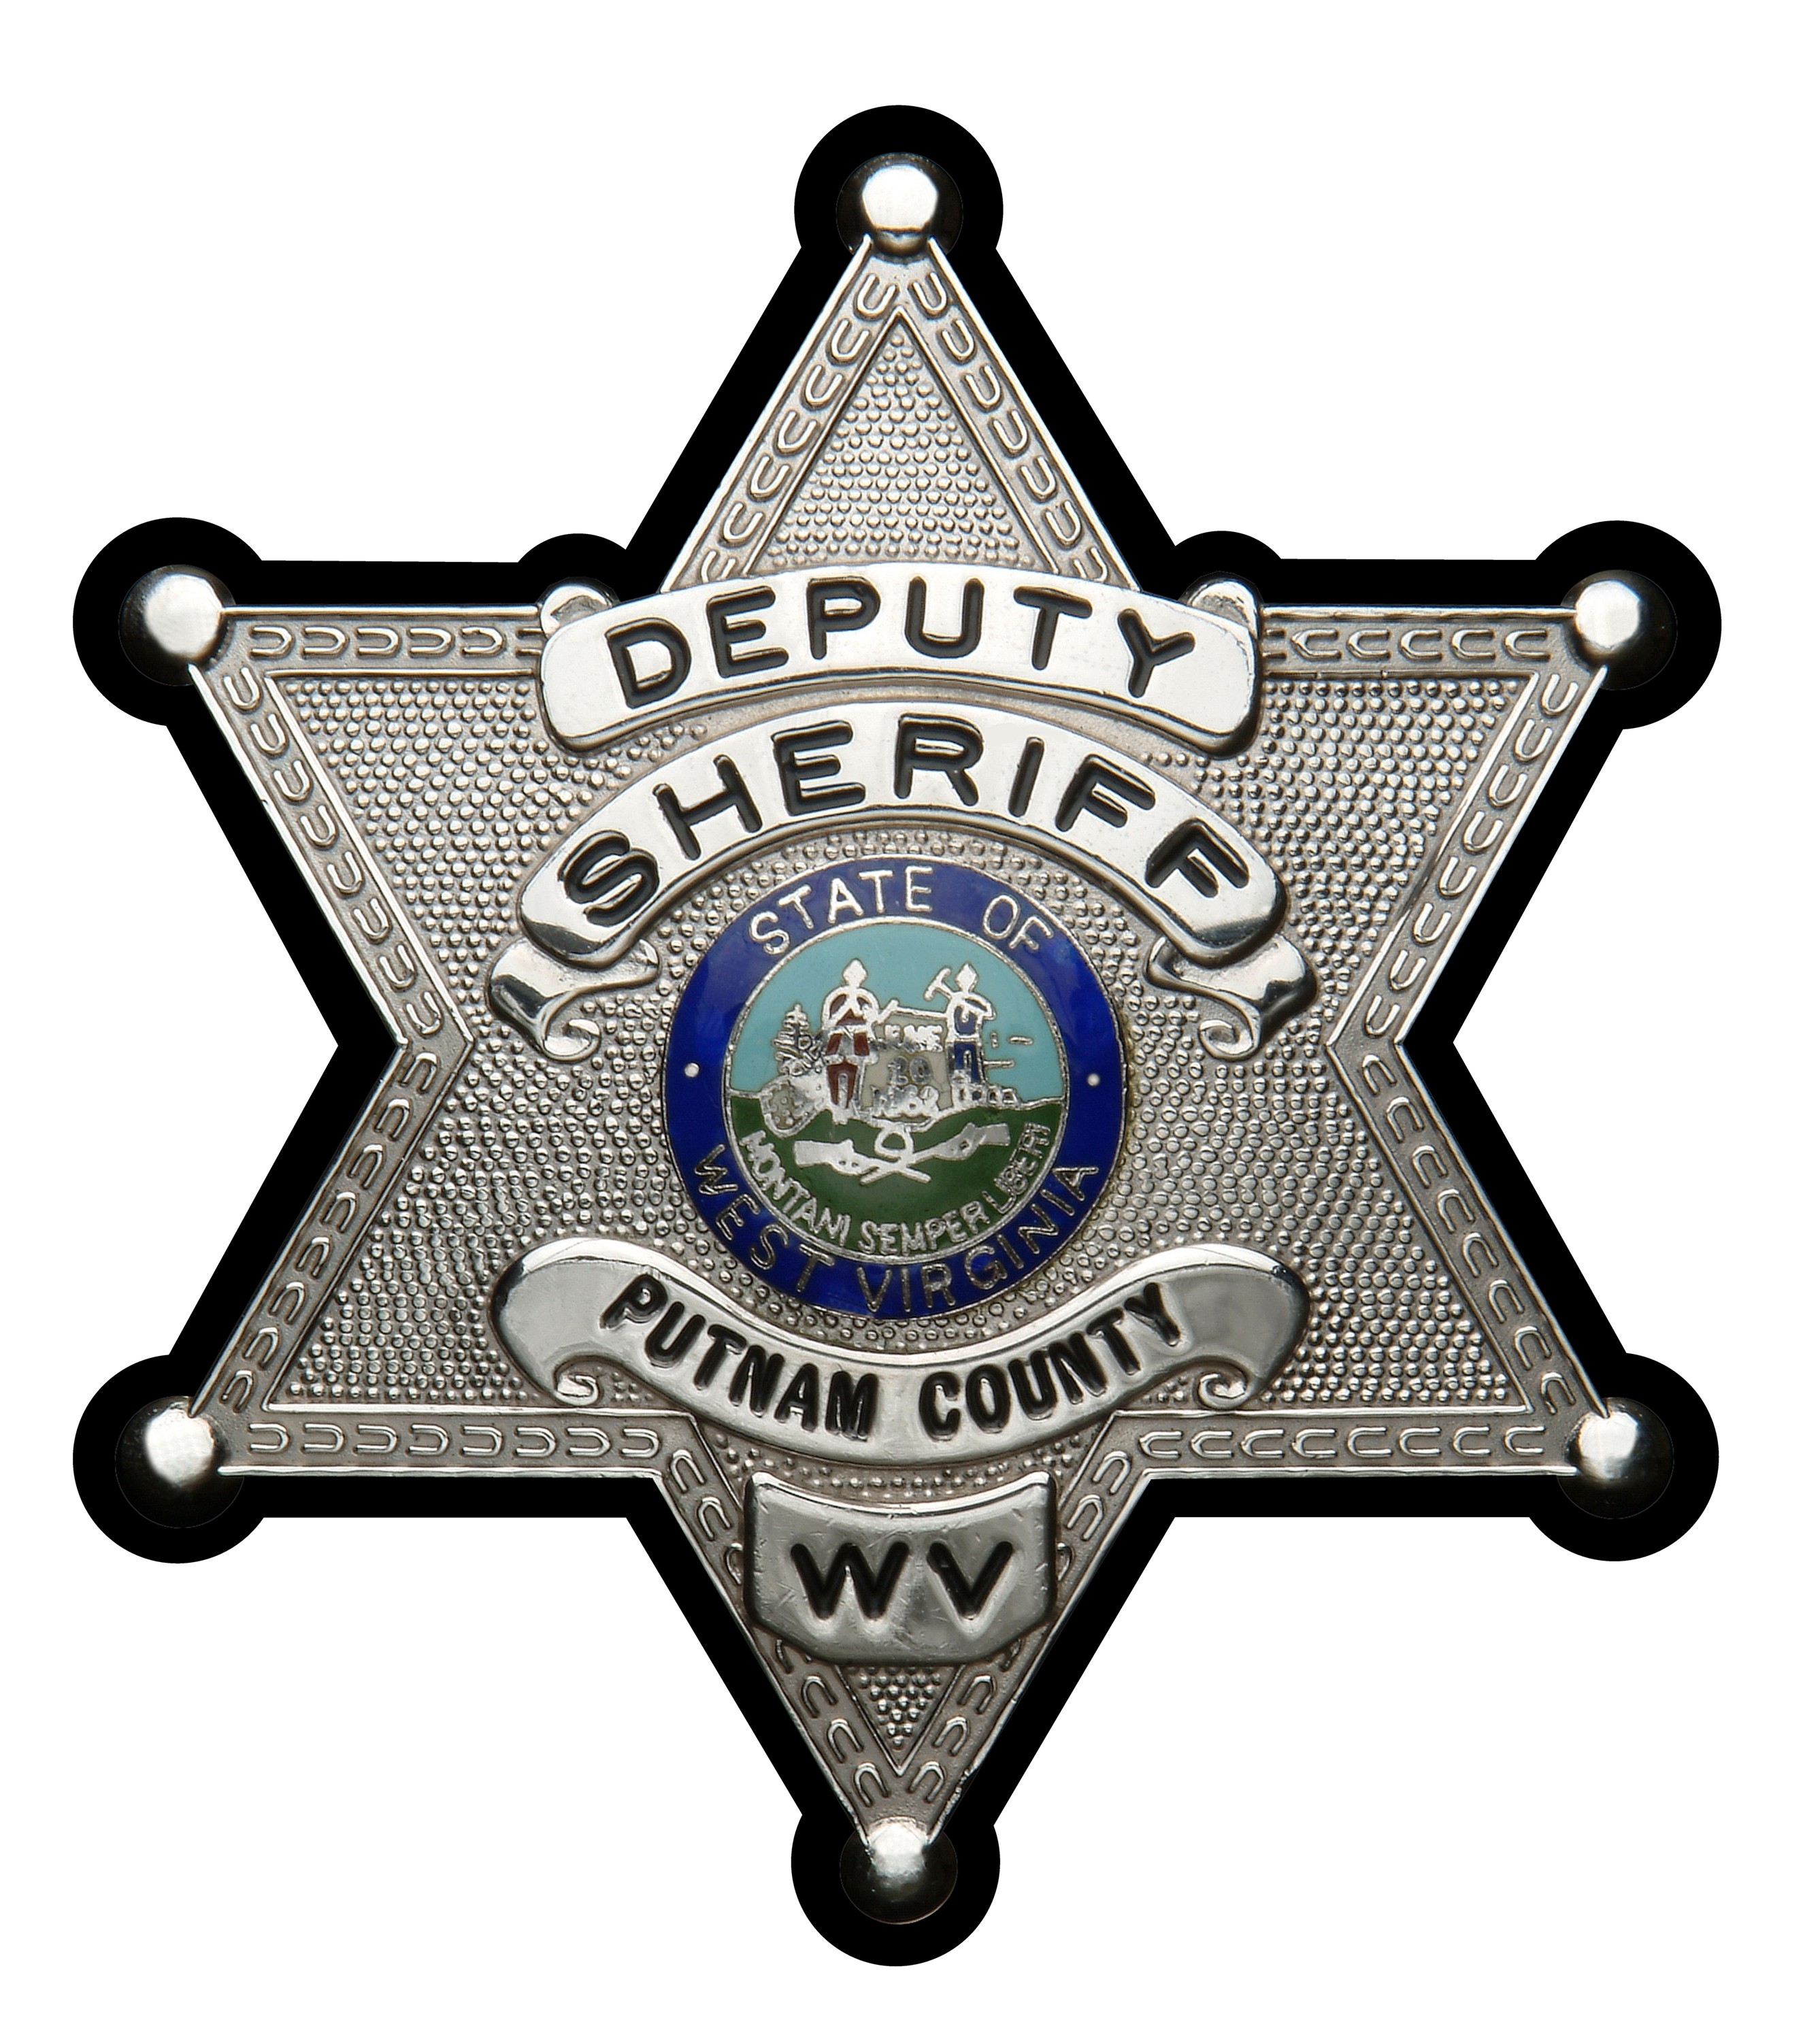 Putnam County Sheriff's Department, WV Public Safety Jobs